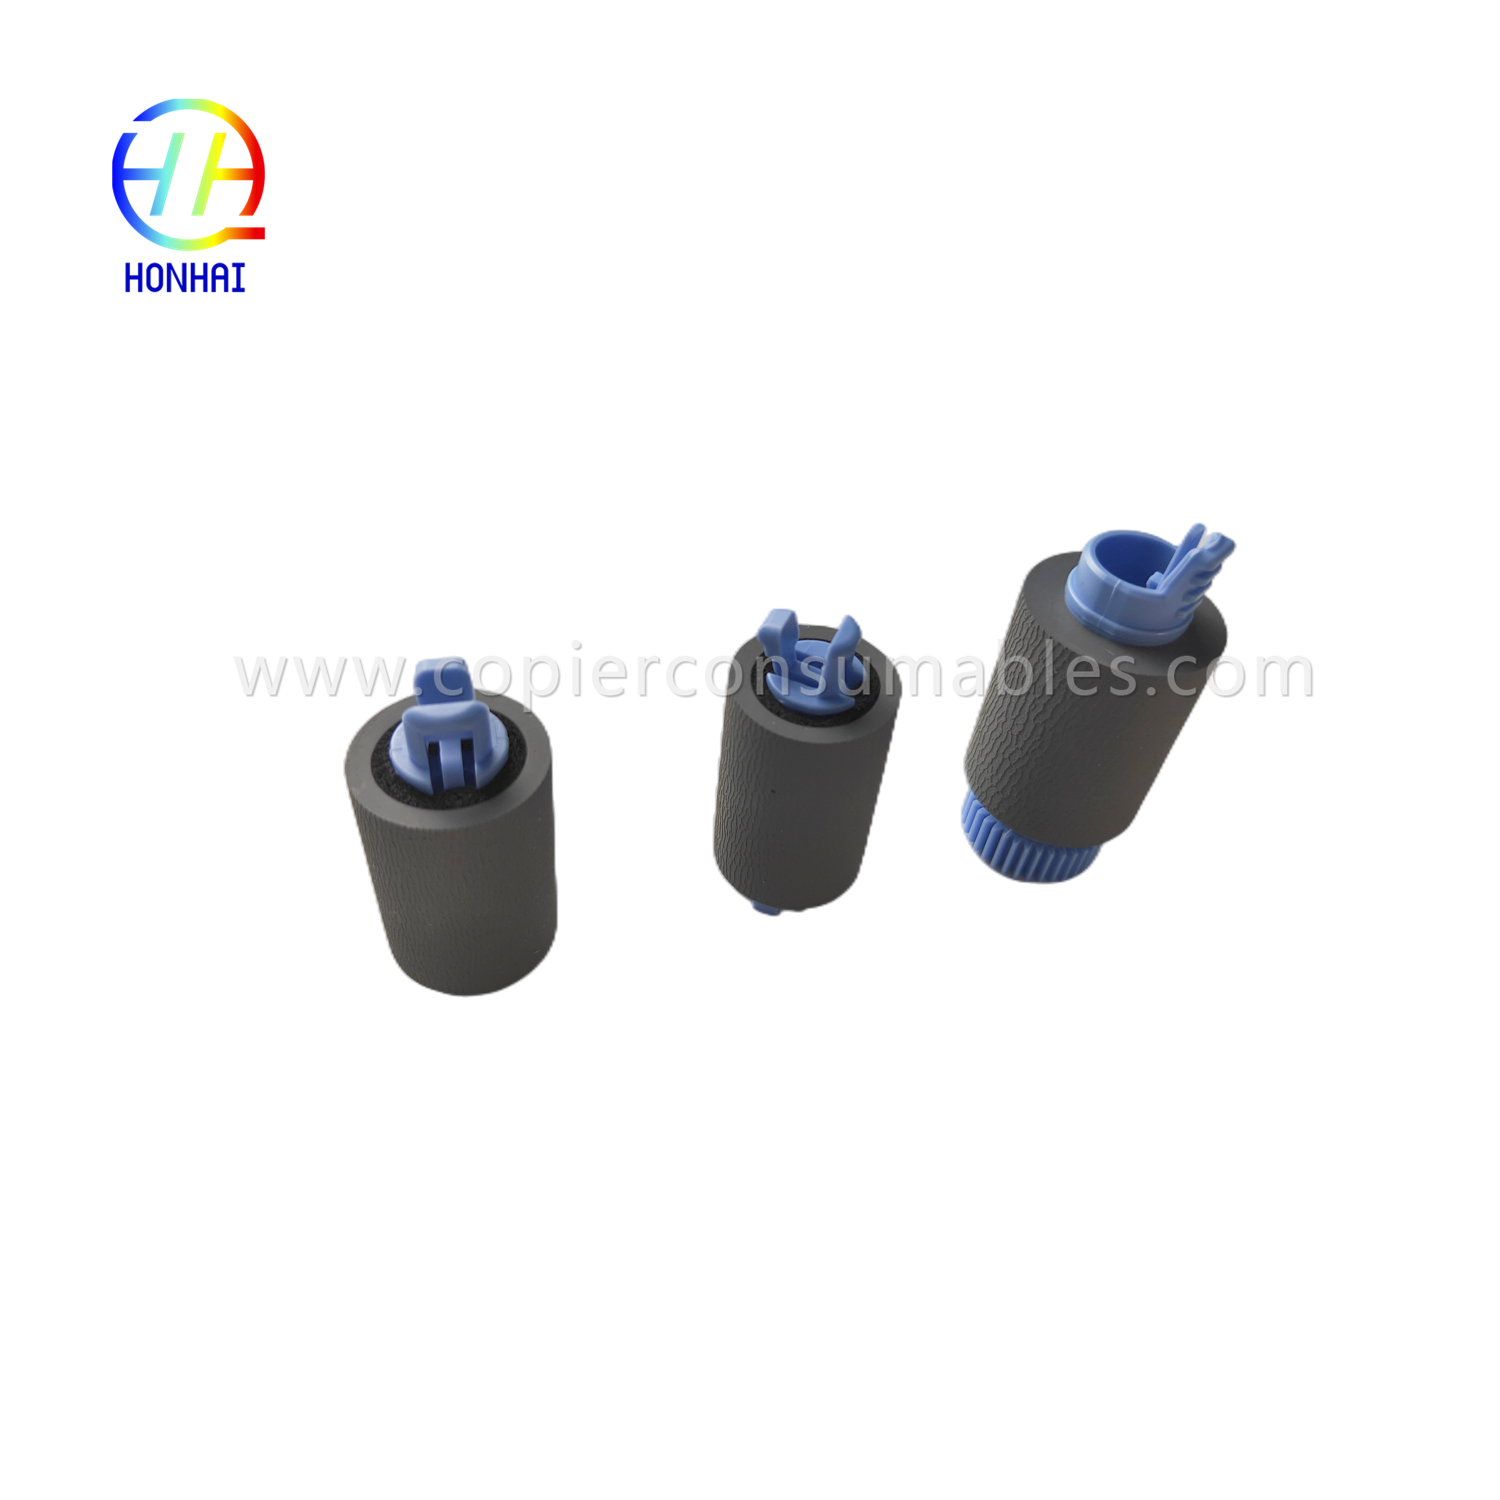 https://c585.goodao.net/tray-2-5-pickup-feed-separation-roller-set-for-hp-a7w93-67082-mfp-785f-780dn-e77650z-e77660z-e77650dn-e740766 p77750z-p77760z-p75050dn-p75050dw-product/